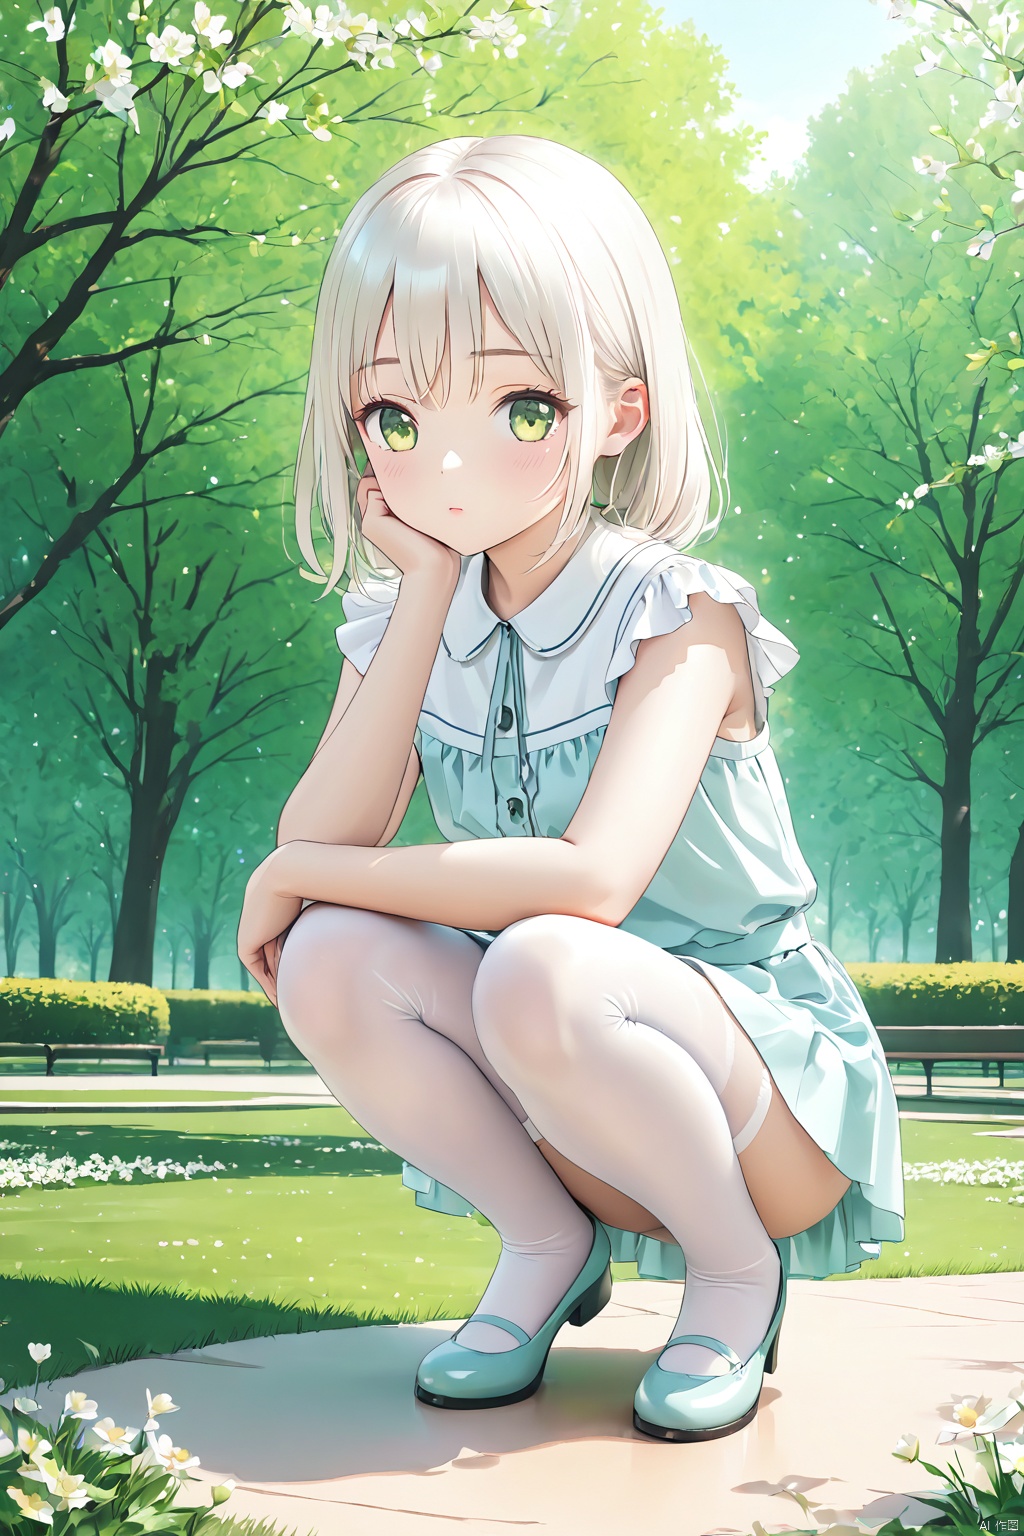 Masterpiece, photo-realistic, superior quality, 8K render, highly detailed anime-styled girl, solo character, squatting pose, high-resolution imagery, delicate smooth skin texture, youthful and innocent facial expression, meticulous attention to intricate details, vivid color scheme, artistic illustration style, exceptionally sharp focus on facial features and eyes, precise lighting with soft shadows emphasizing contours, dressed in a pure white knee-high stockings, complemented by a fashionable outfit, set against an ambient springtime background, urban or park setting.